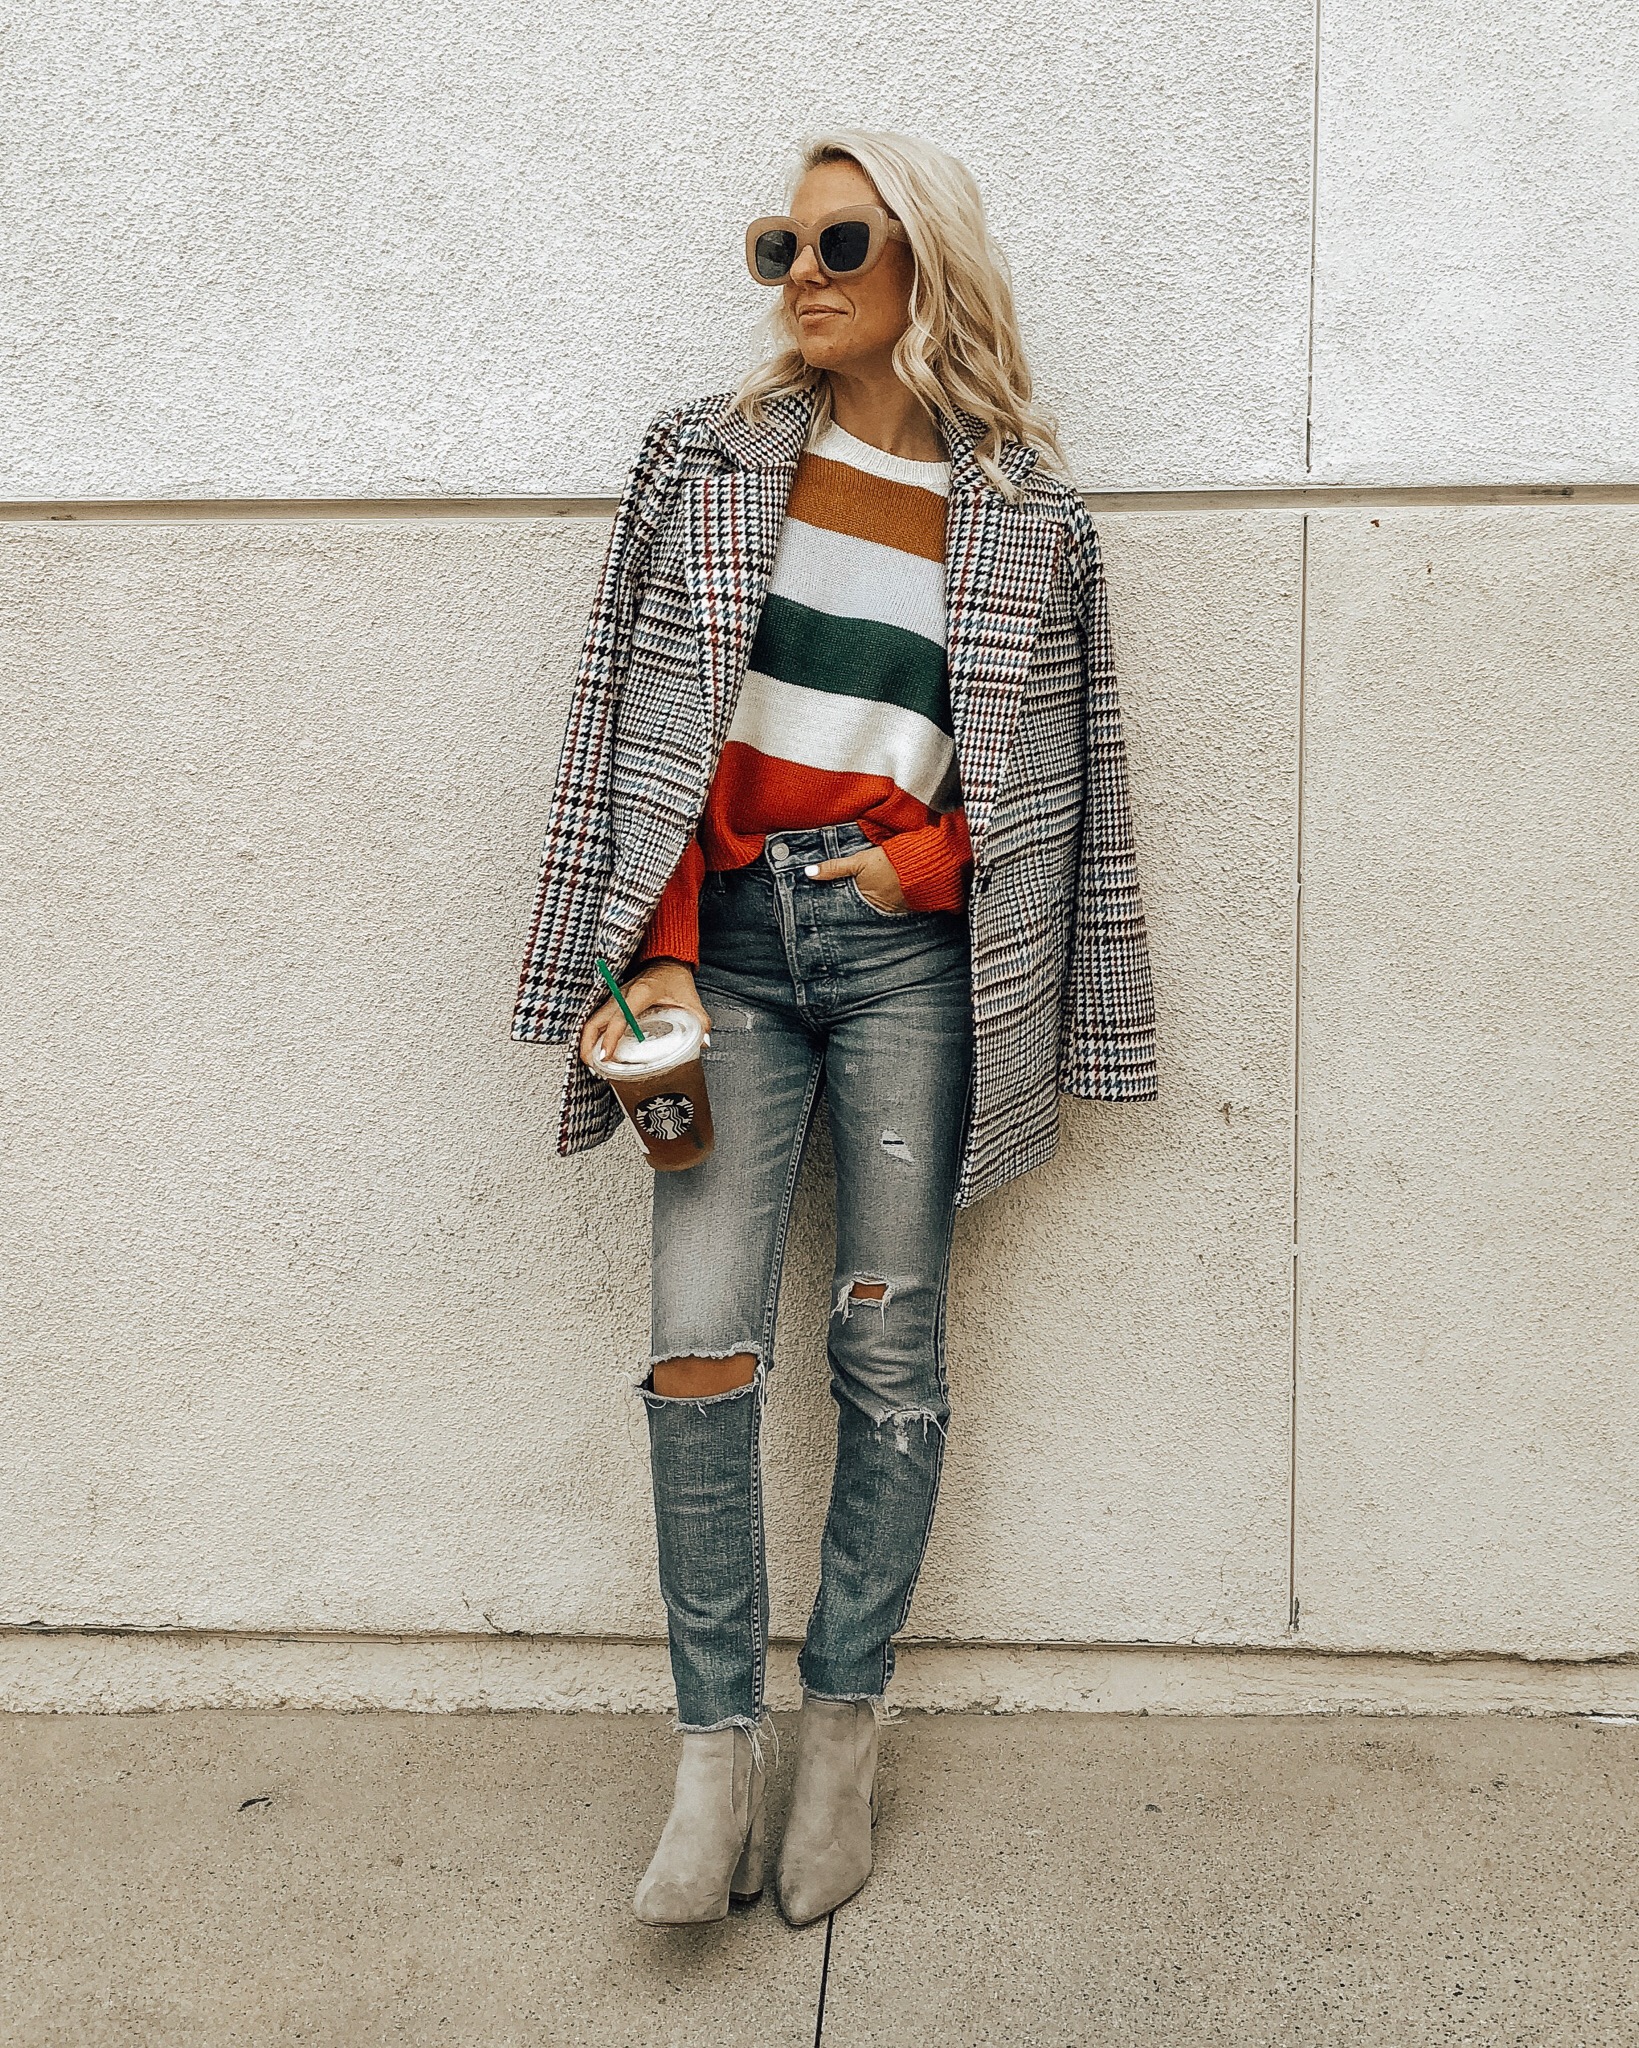 MAD FOR PLAID- Jaclyn De Leon Style + fall fashion + plaid coat + street style + style inspo + cozy striped sweater + block heel boots + winter casual style + 90's fashion + retro style + mom style + forever 21 + affordable fashion